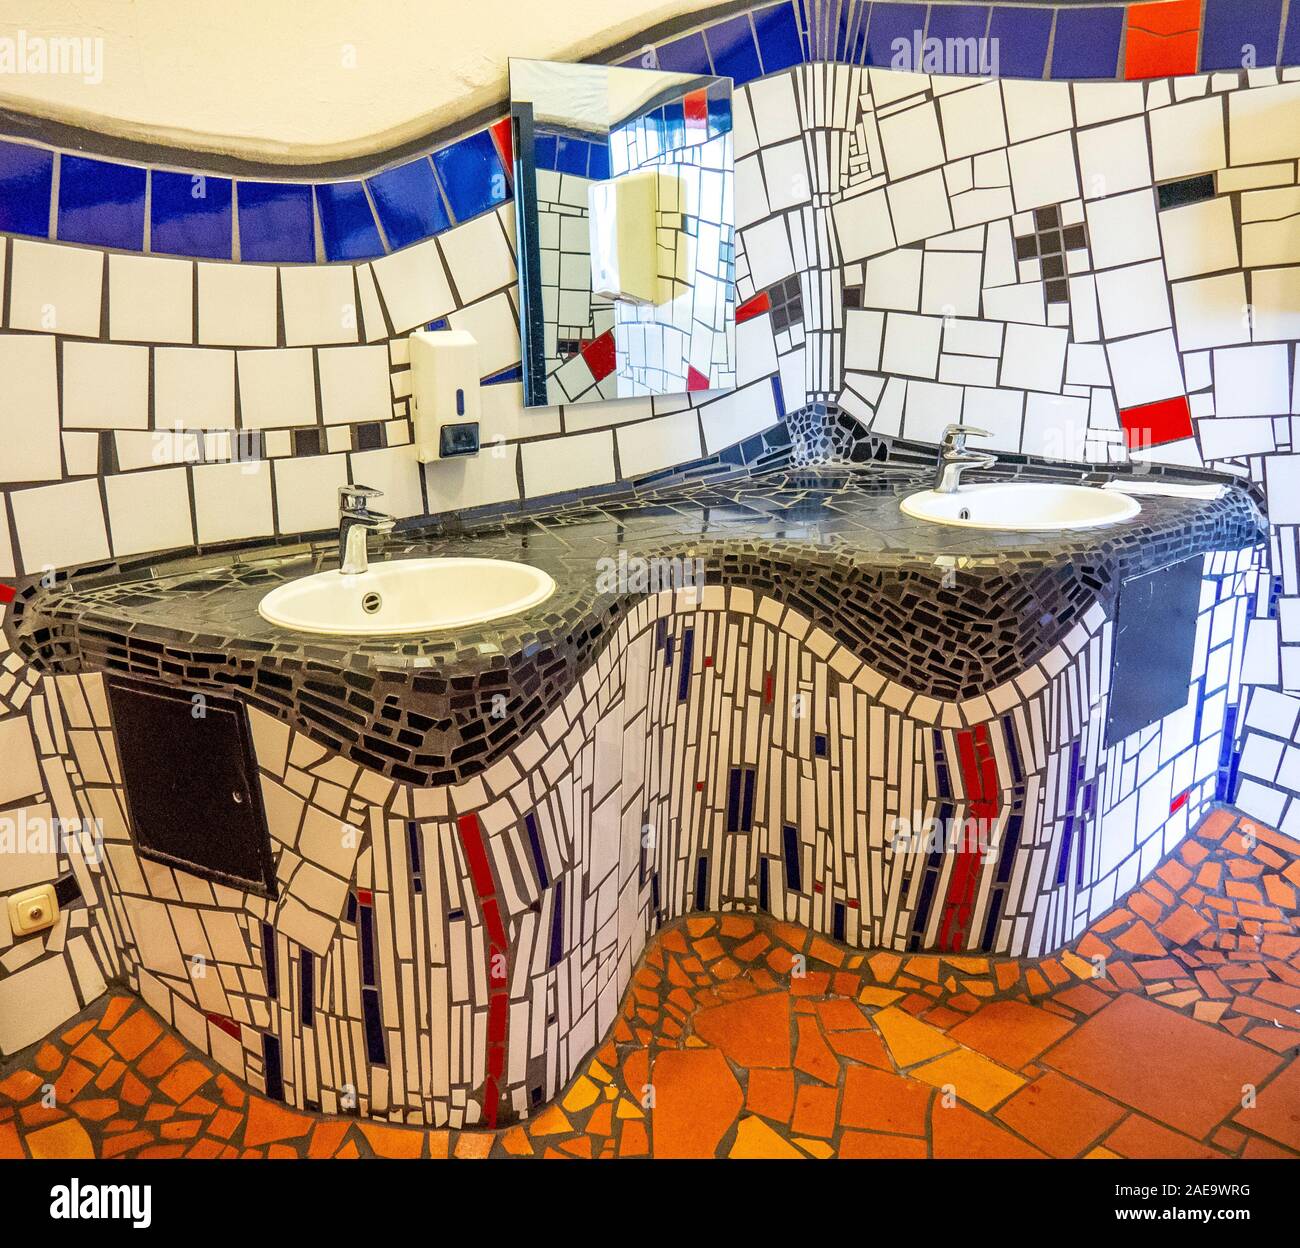 Wash basins and quirky wall tiling toilets of Bahnhof Uelzen railway station renovated by architect Friedensreich Hundertwasser Lower Saxony Germany. Stock Photo